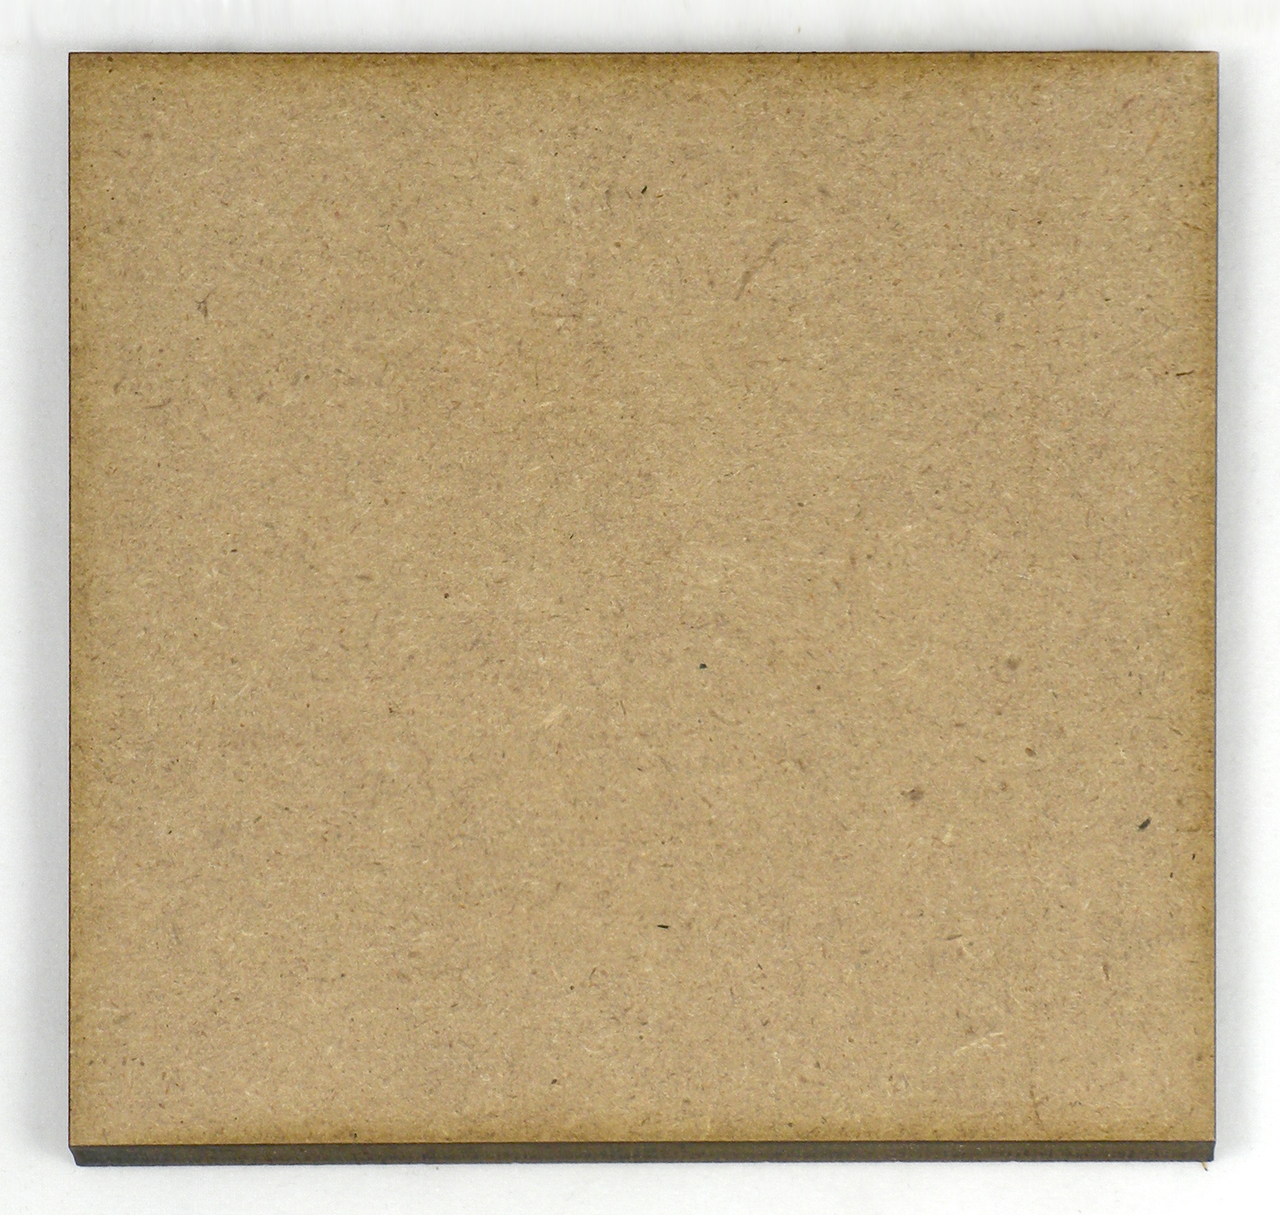 Essential Square Surface - 4" x 4"